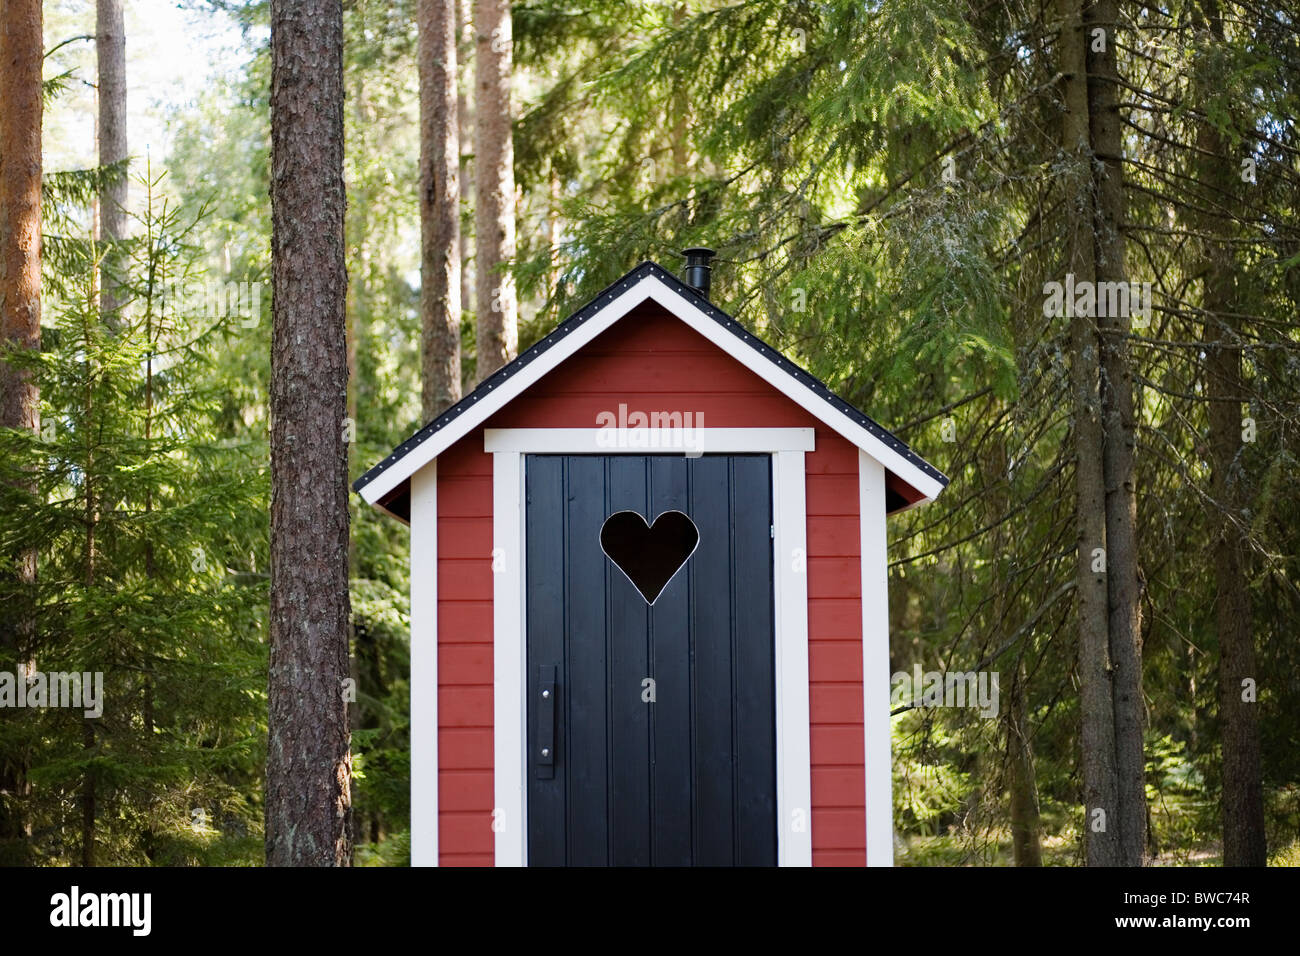 Outhouse in forest Banque D'Images